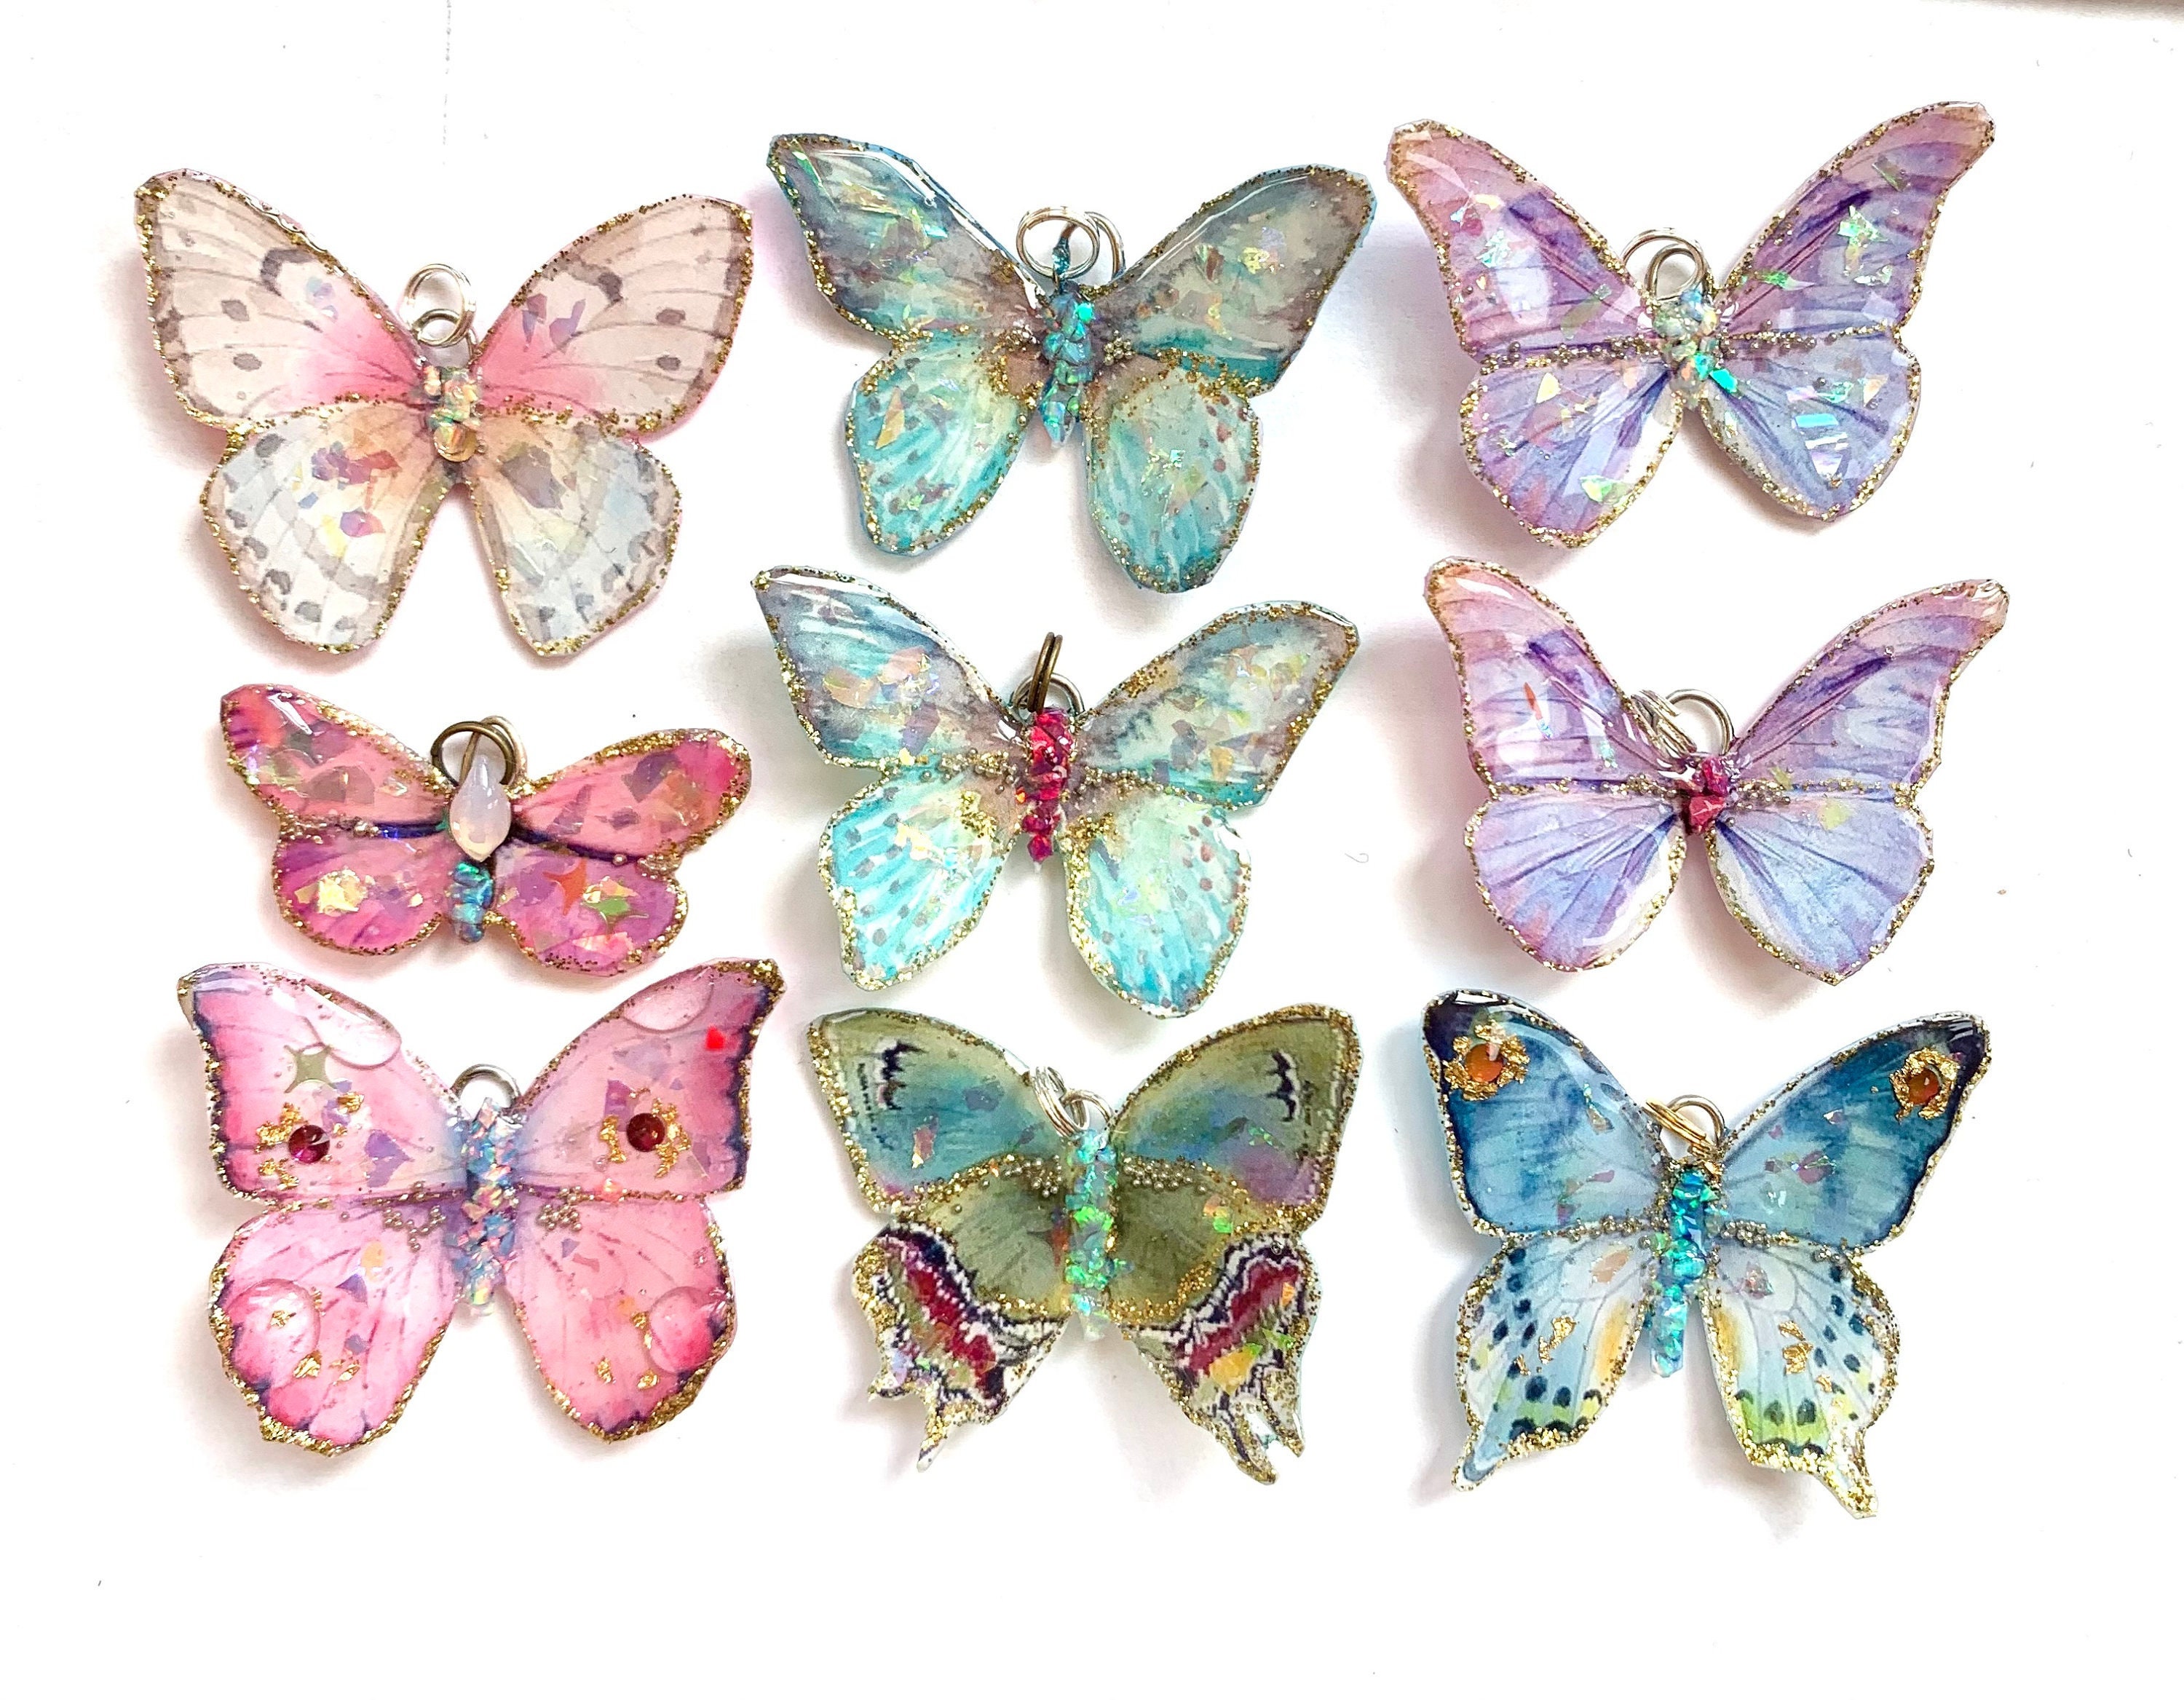 Set of 100, Acrylic Butterfly Beads, Plastic Acrylic Beads, Mixed Color  Butterflies, Butterfly Beads, Craft Beads, Jewelry Making, 21H 